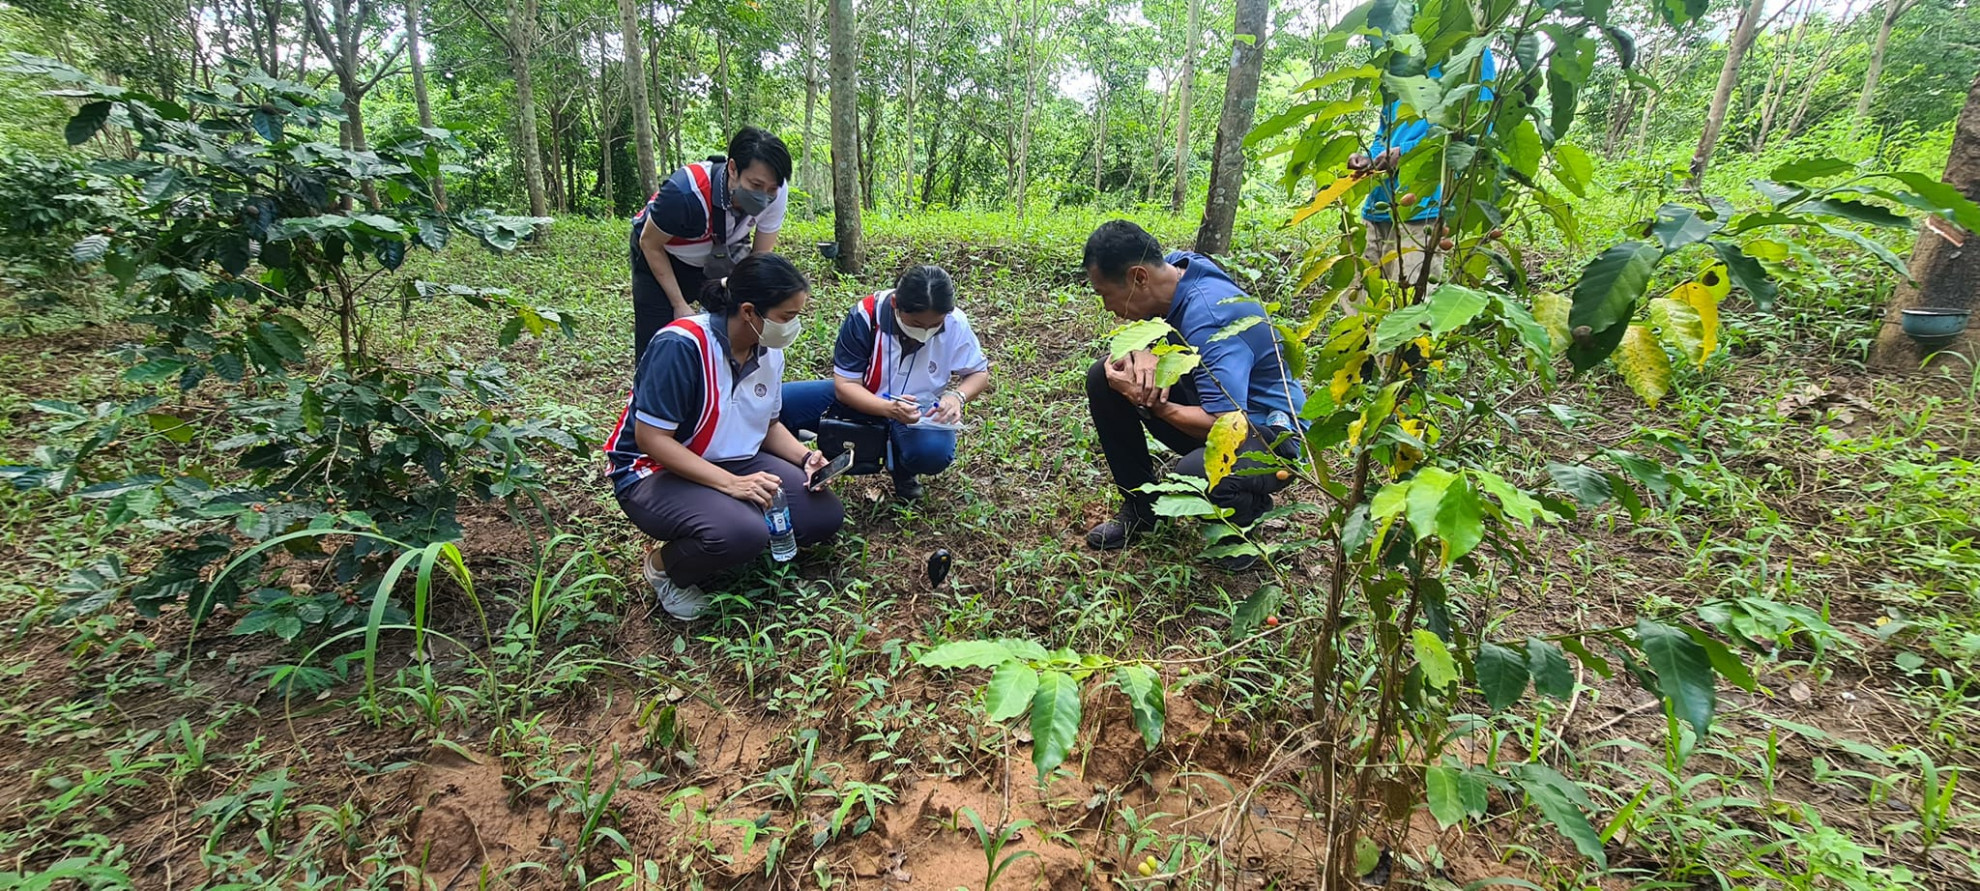 We provided knowledge on the post-harvest process to arabica coffee farmer in Loei Province, Thailand.